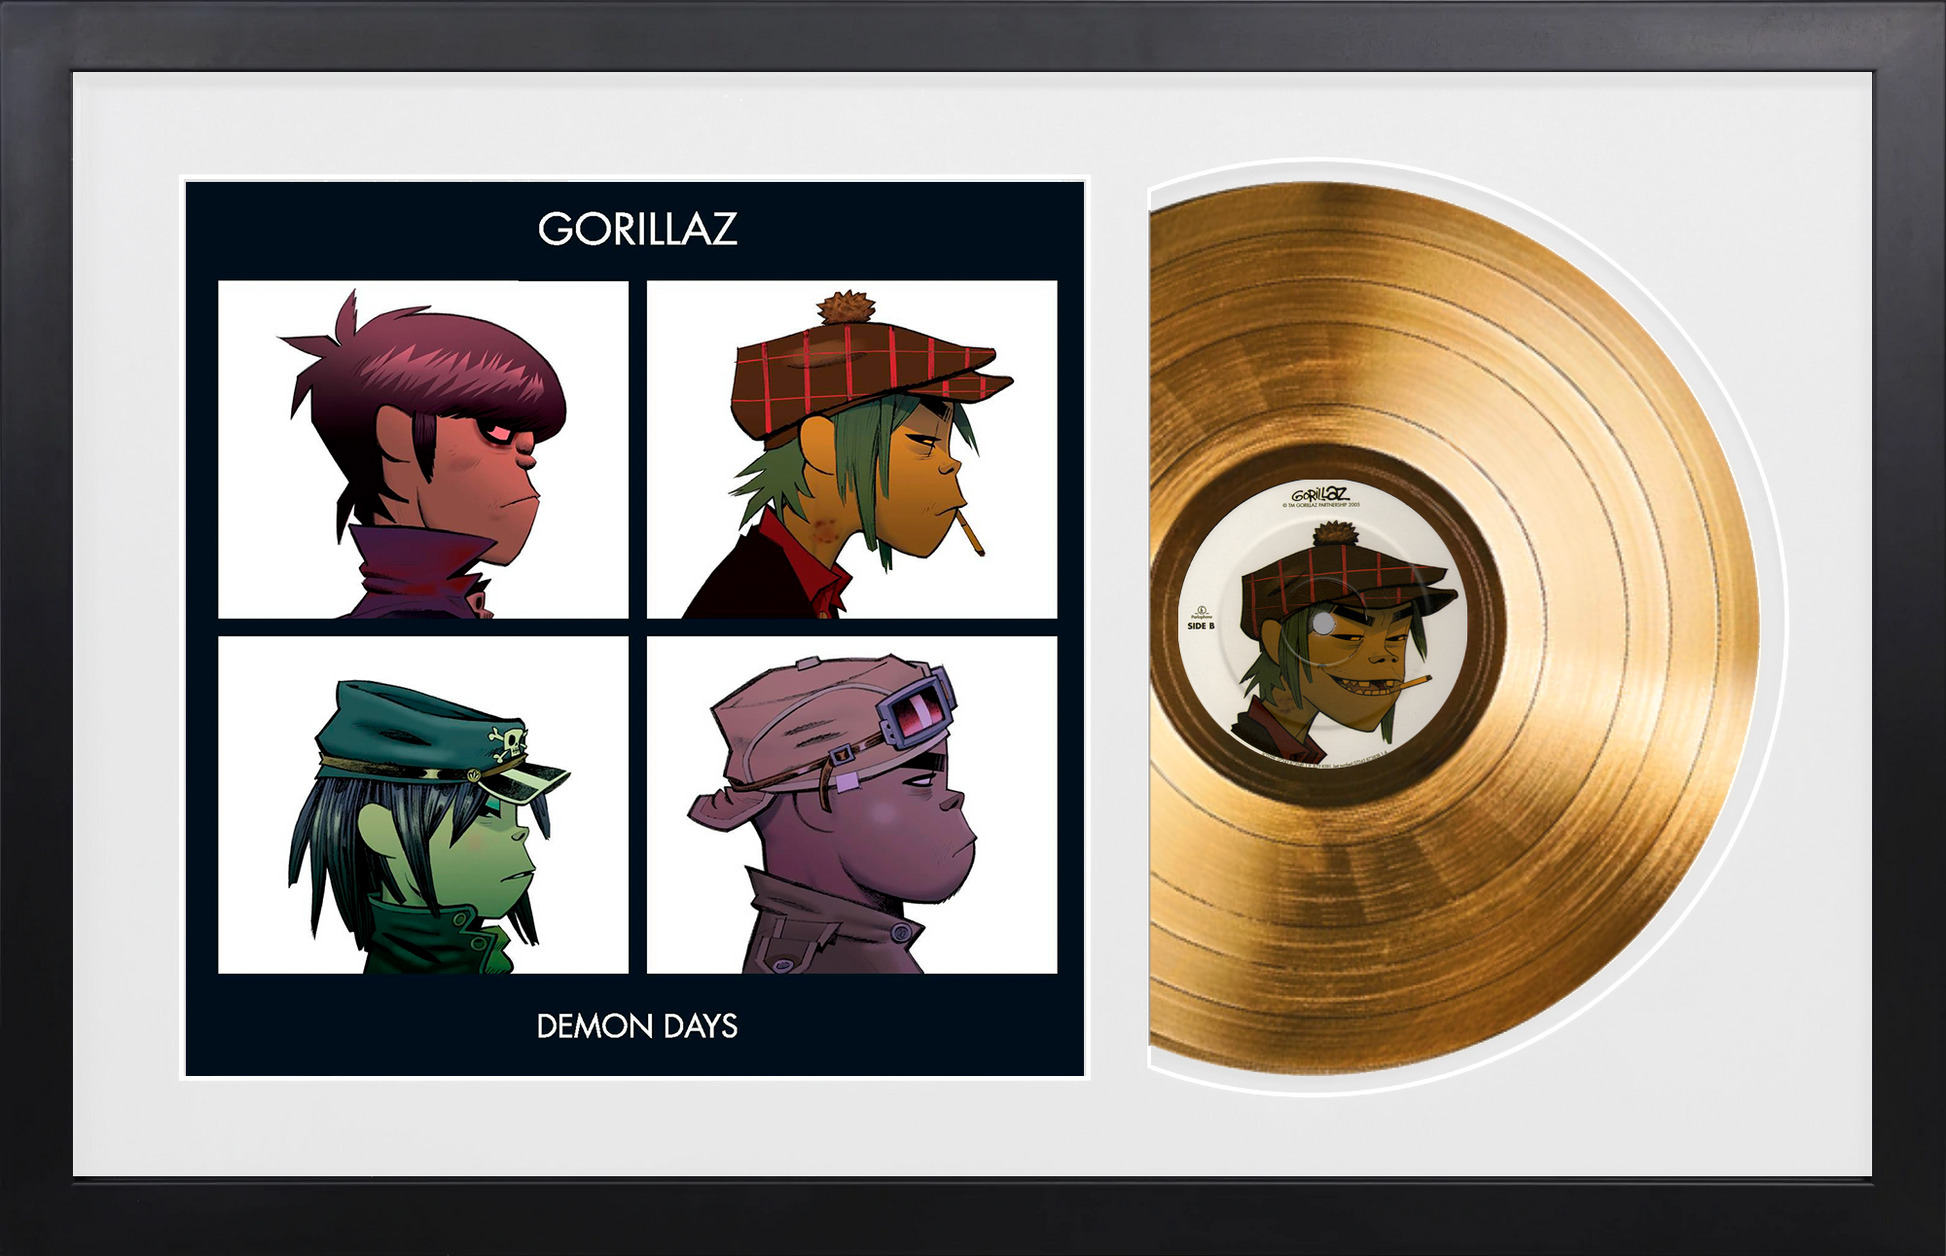 Gorillaz - Demon Days - 14K Gold Plated, Limited Edition Album – Gold Records